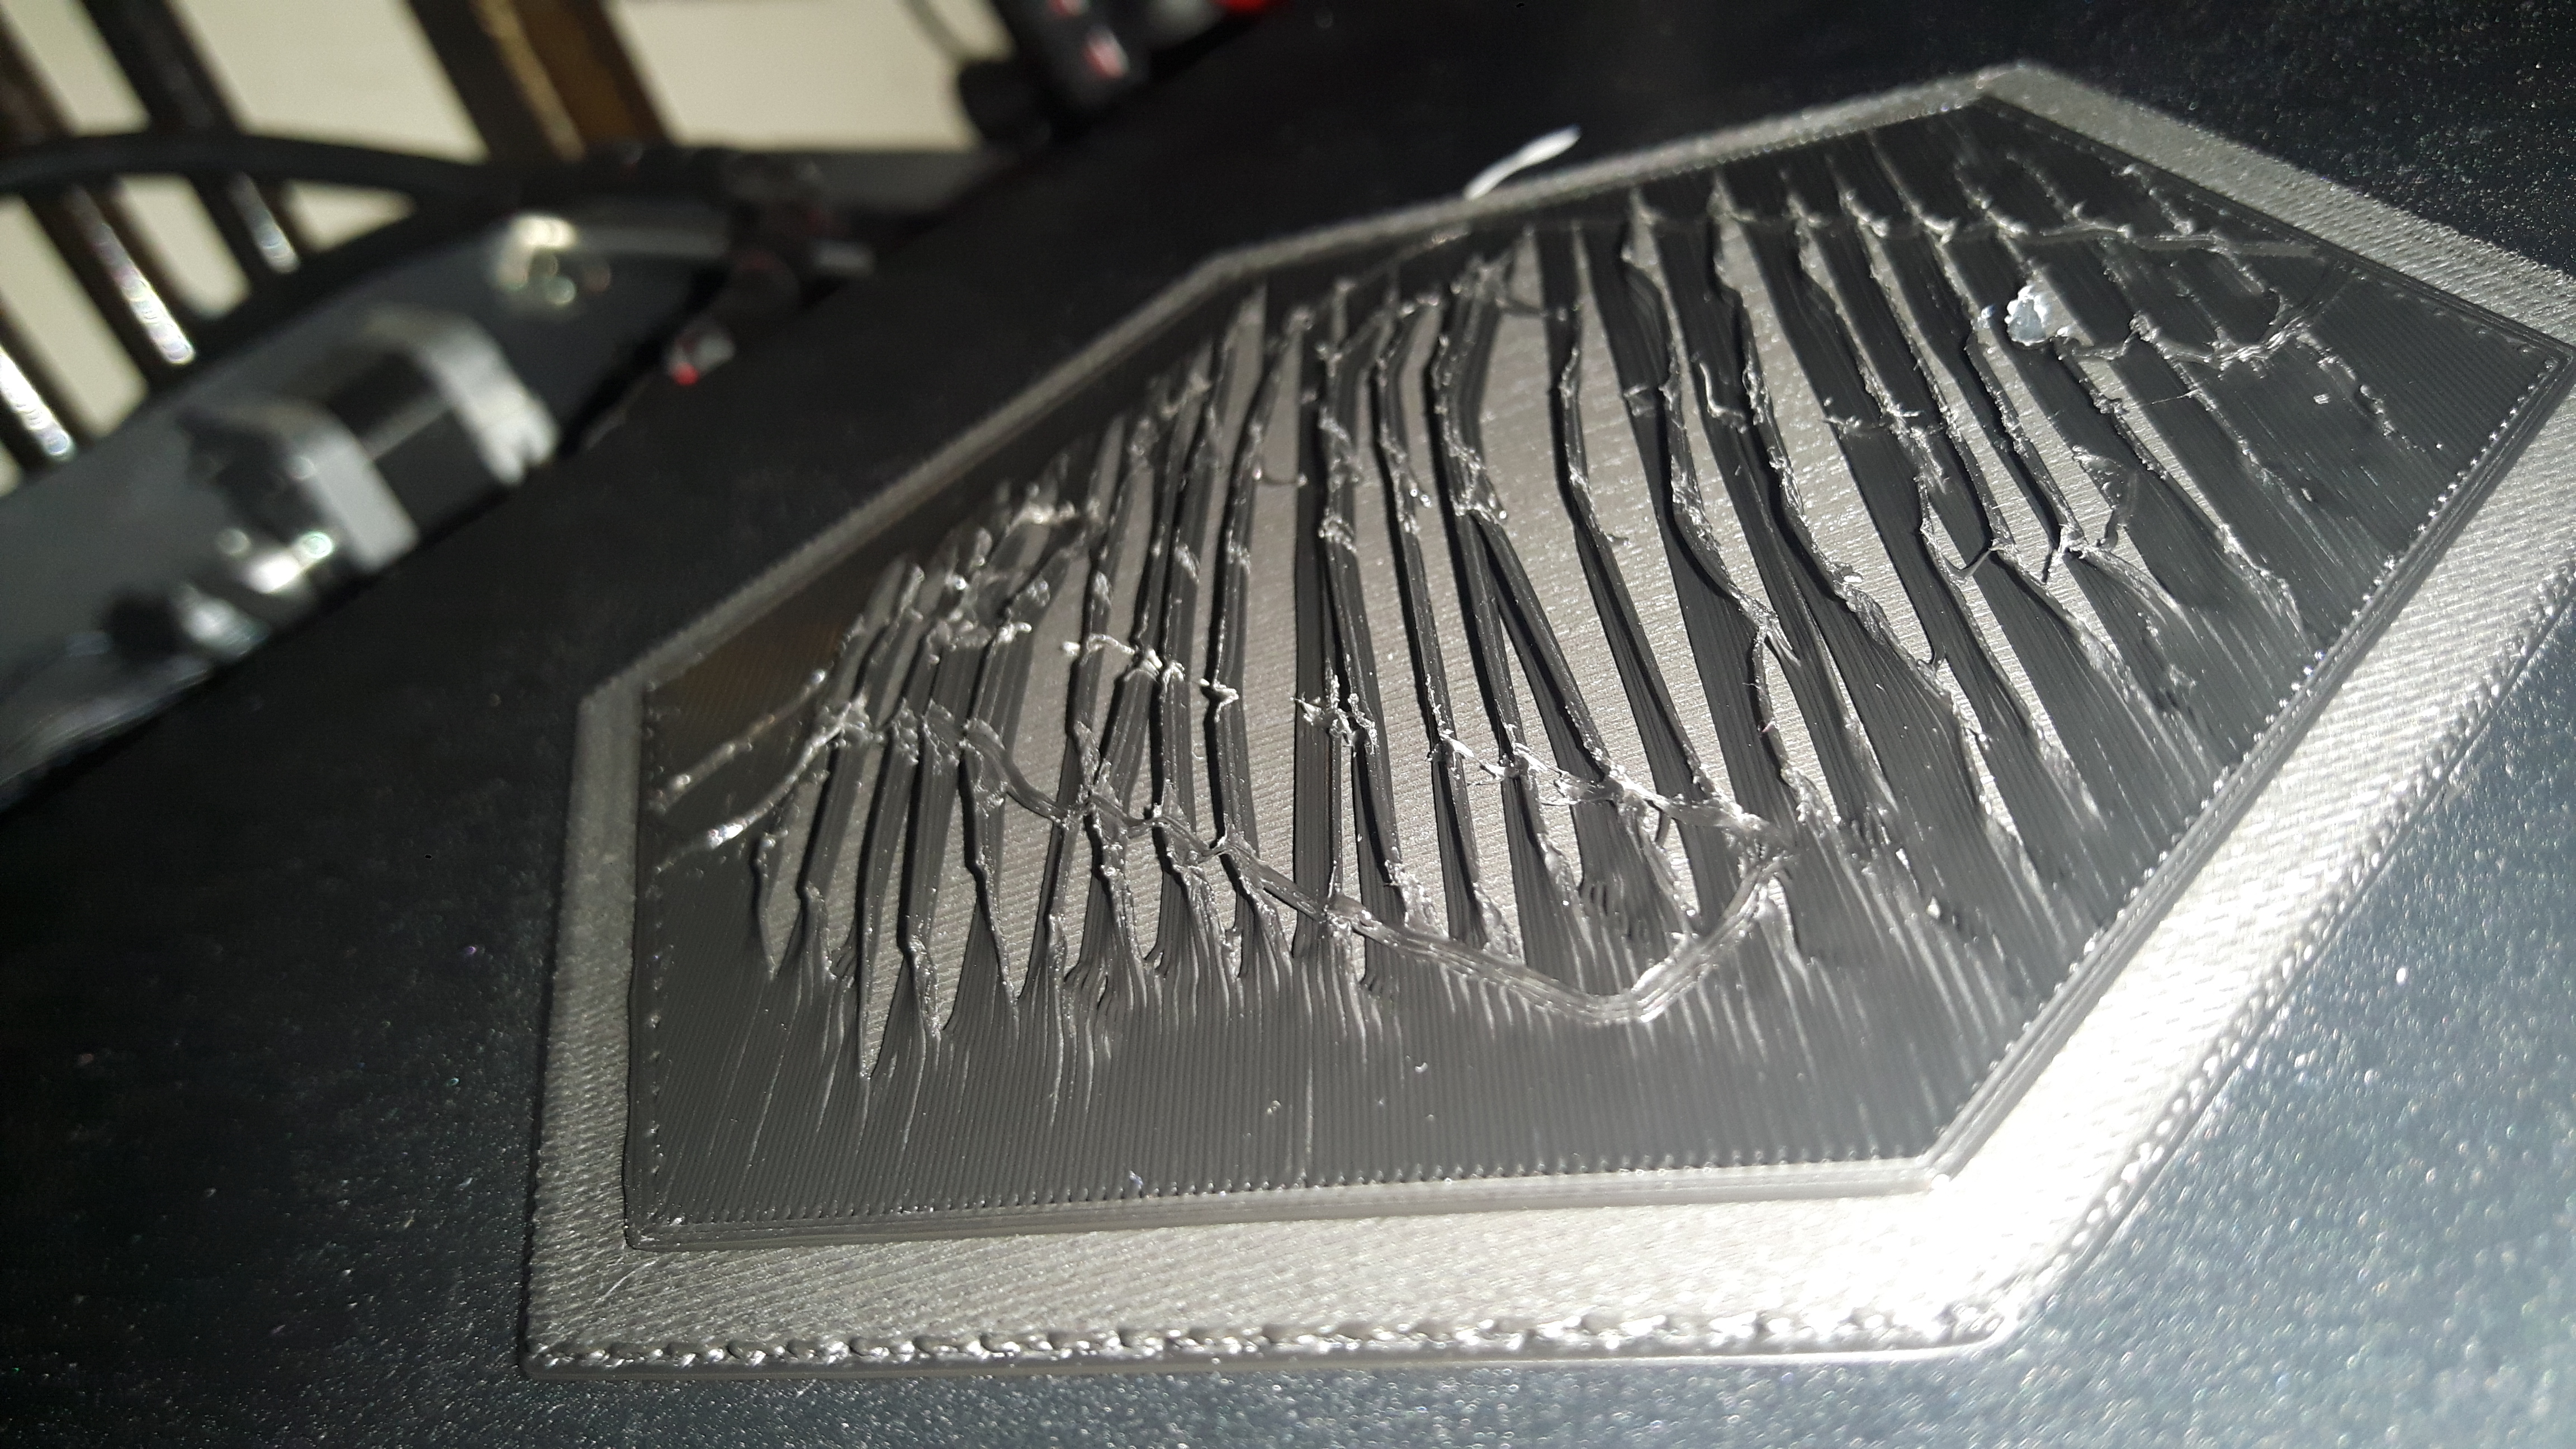 First layer not adhering to raft - can anyone help? - 3D Printing